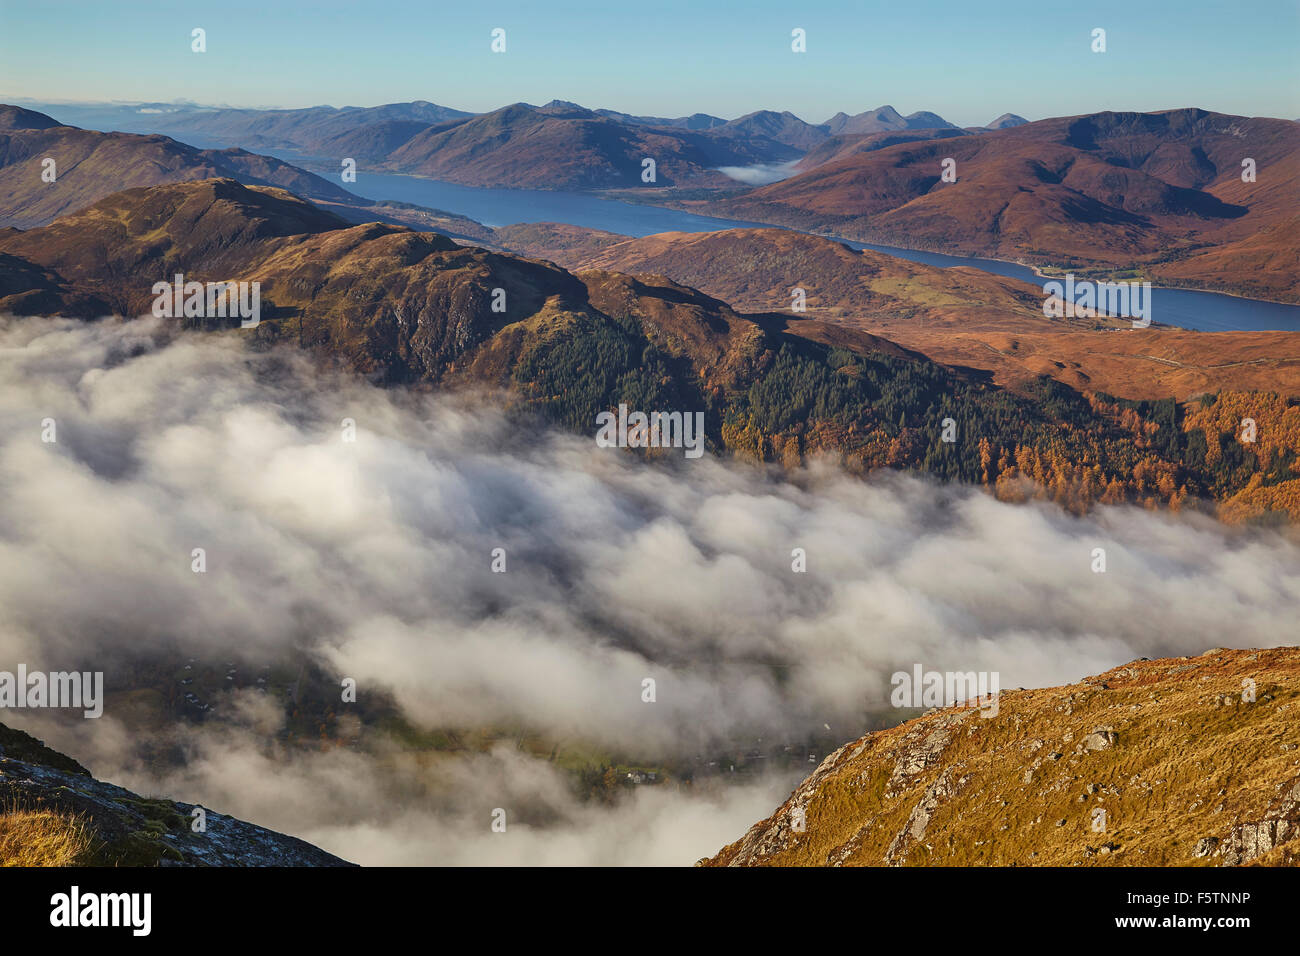 A view along Loch Linnhe, seen from the slopes of Ben Nevis, near Fort William, Scotland, Great Britain. Stock Photo